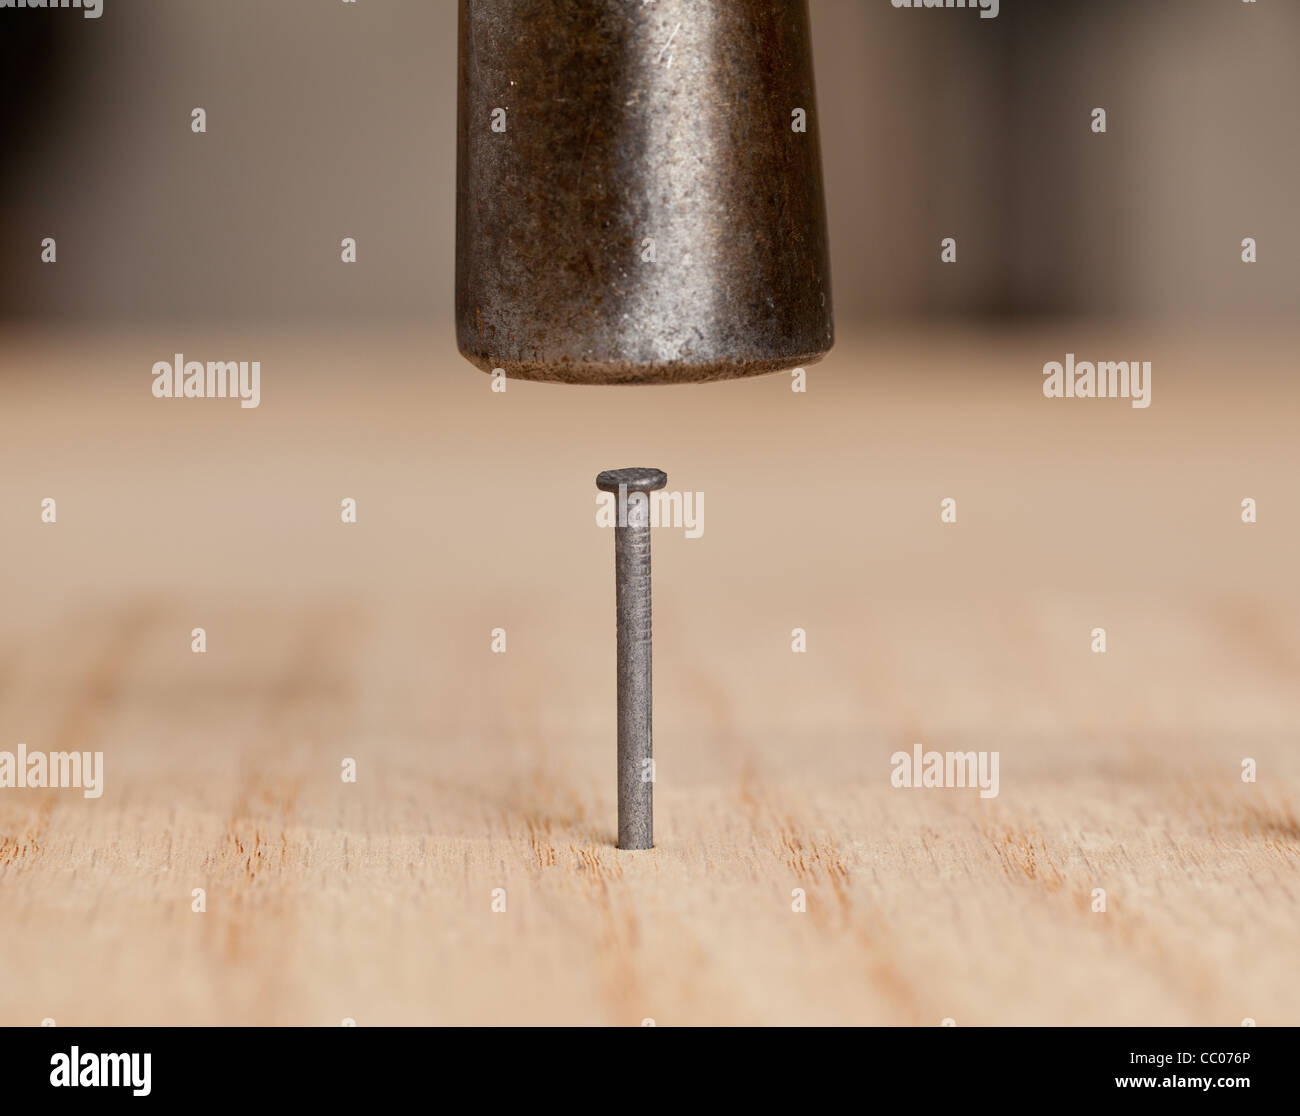 Nail being driven into wood by hammer Stock Photo